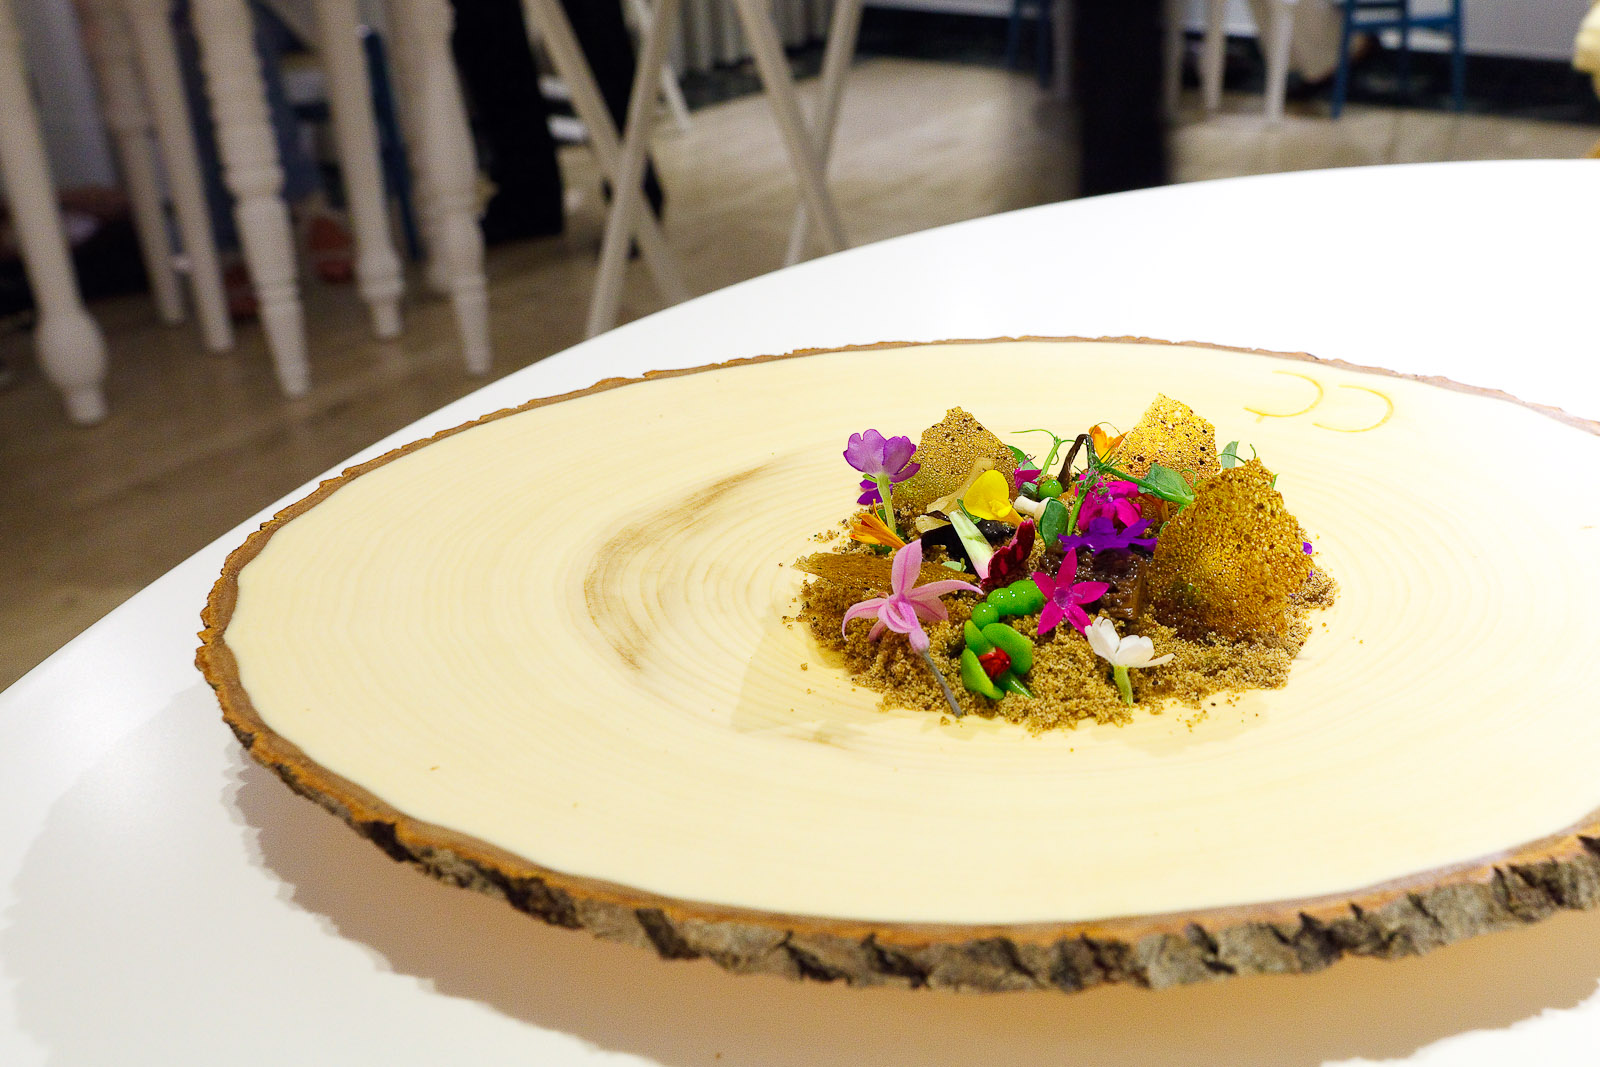 5th Course: The Living Forest